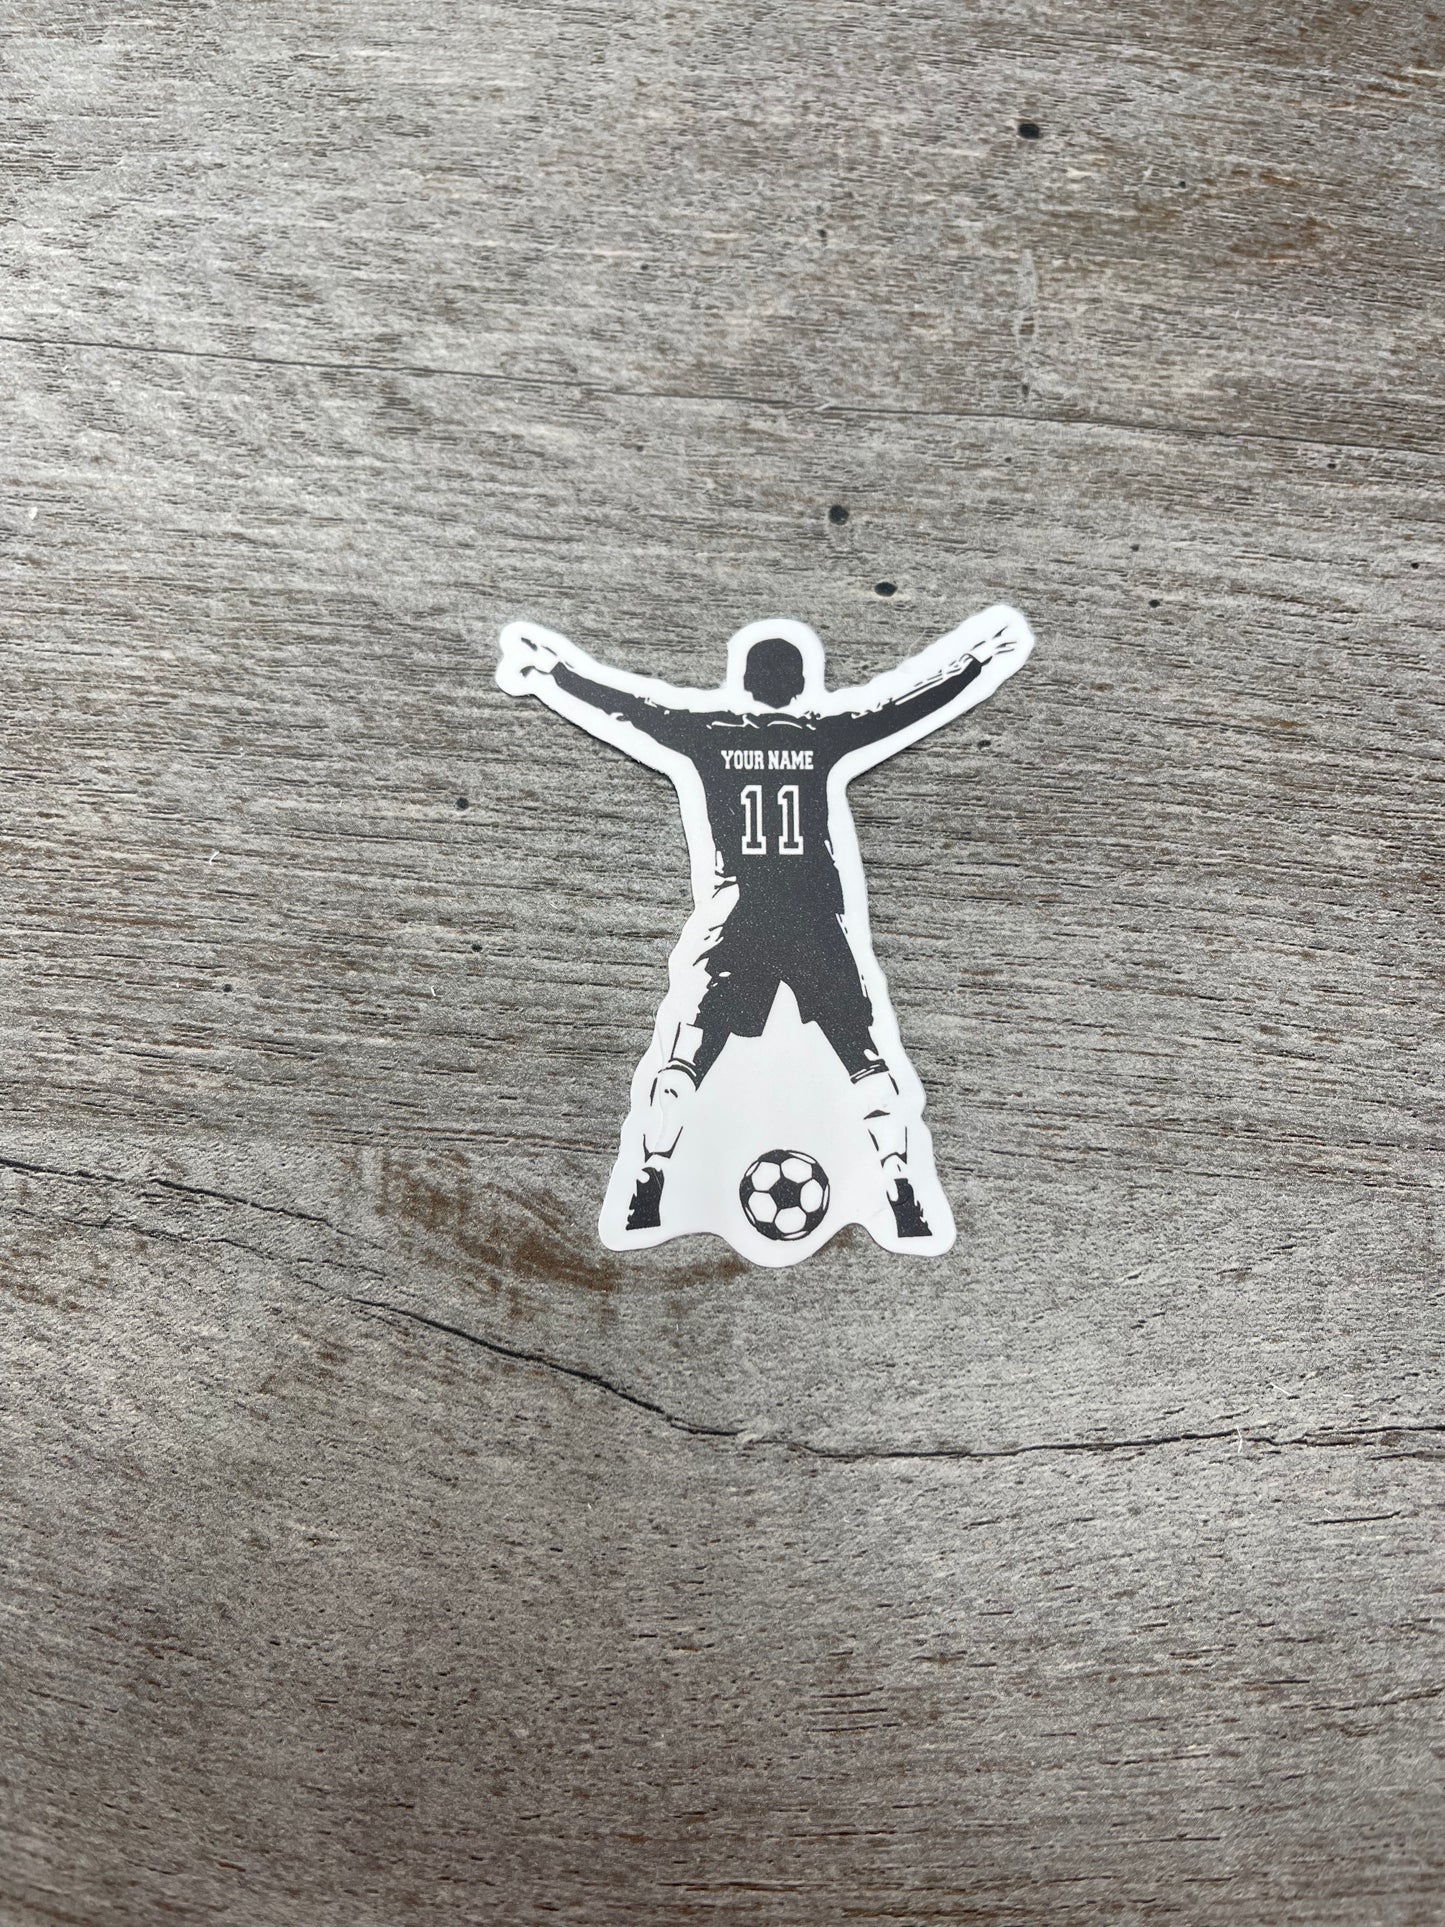 Soccer Stickers {Multiple Styles Available}